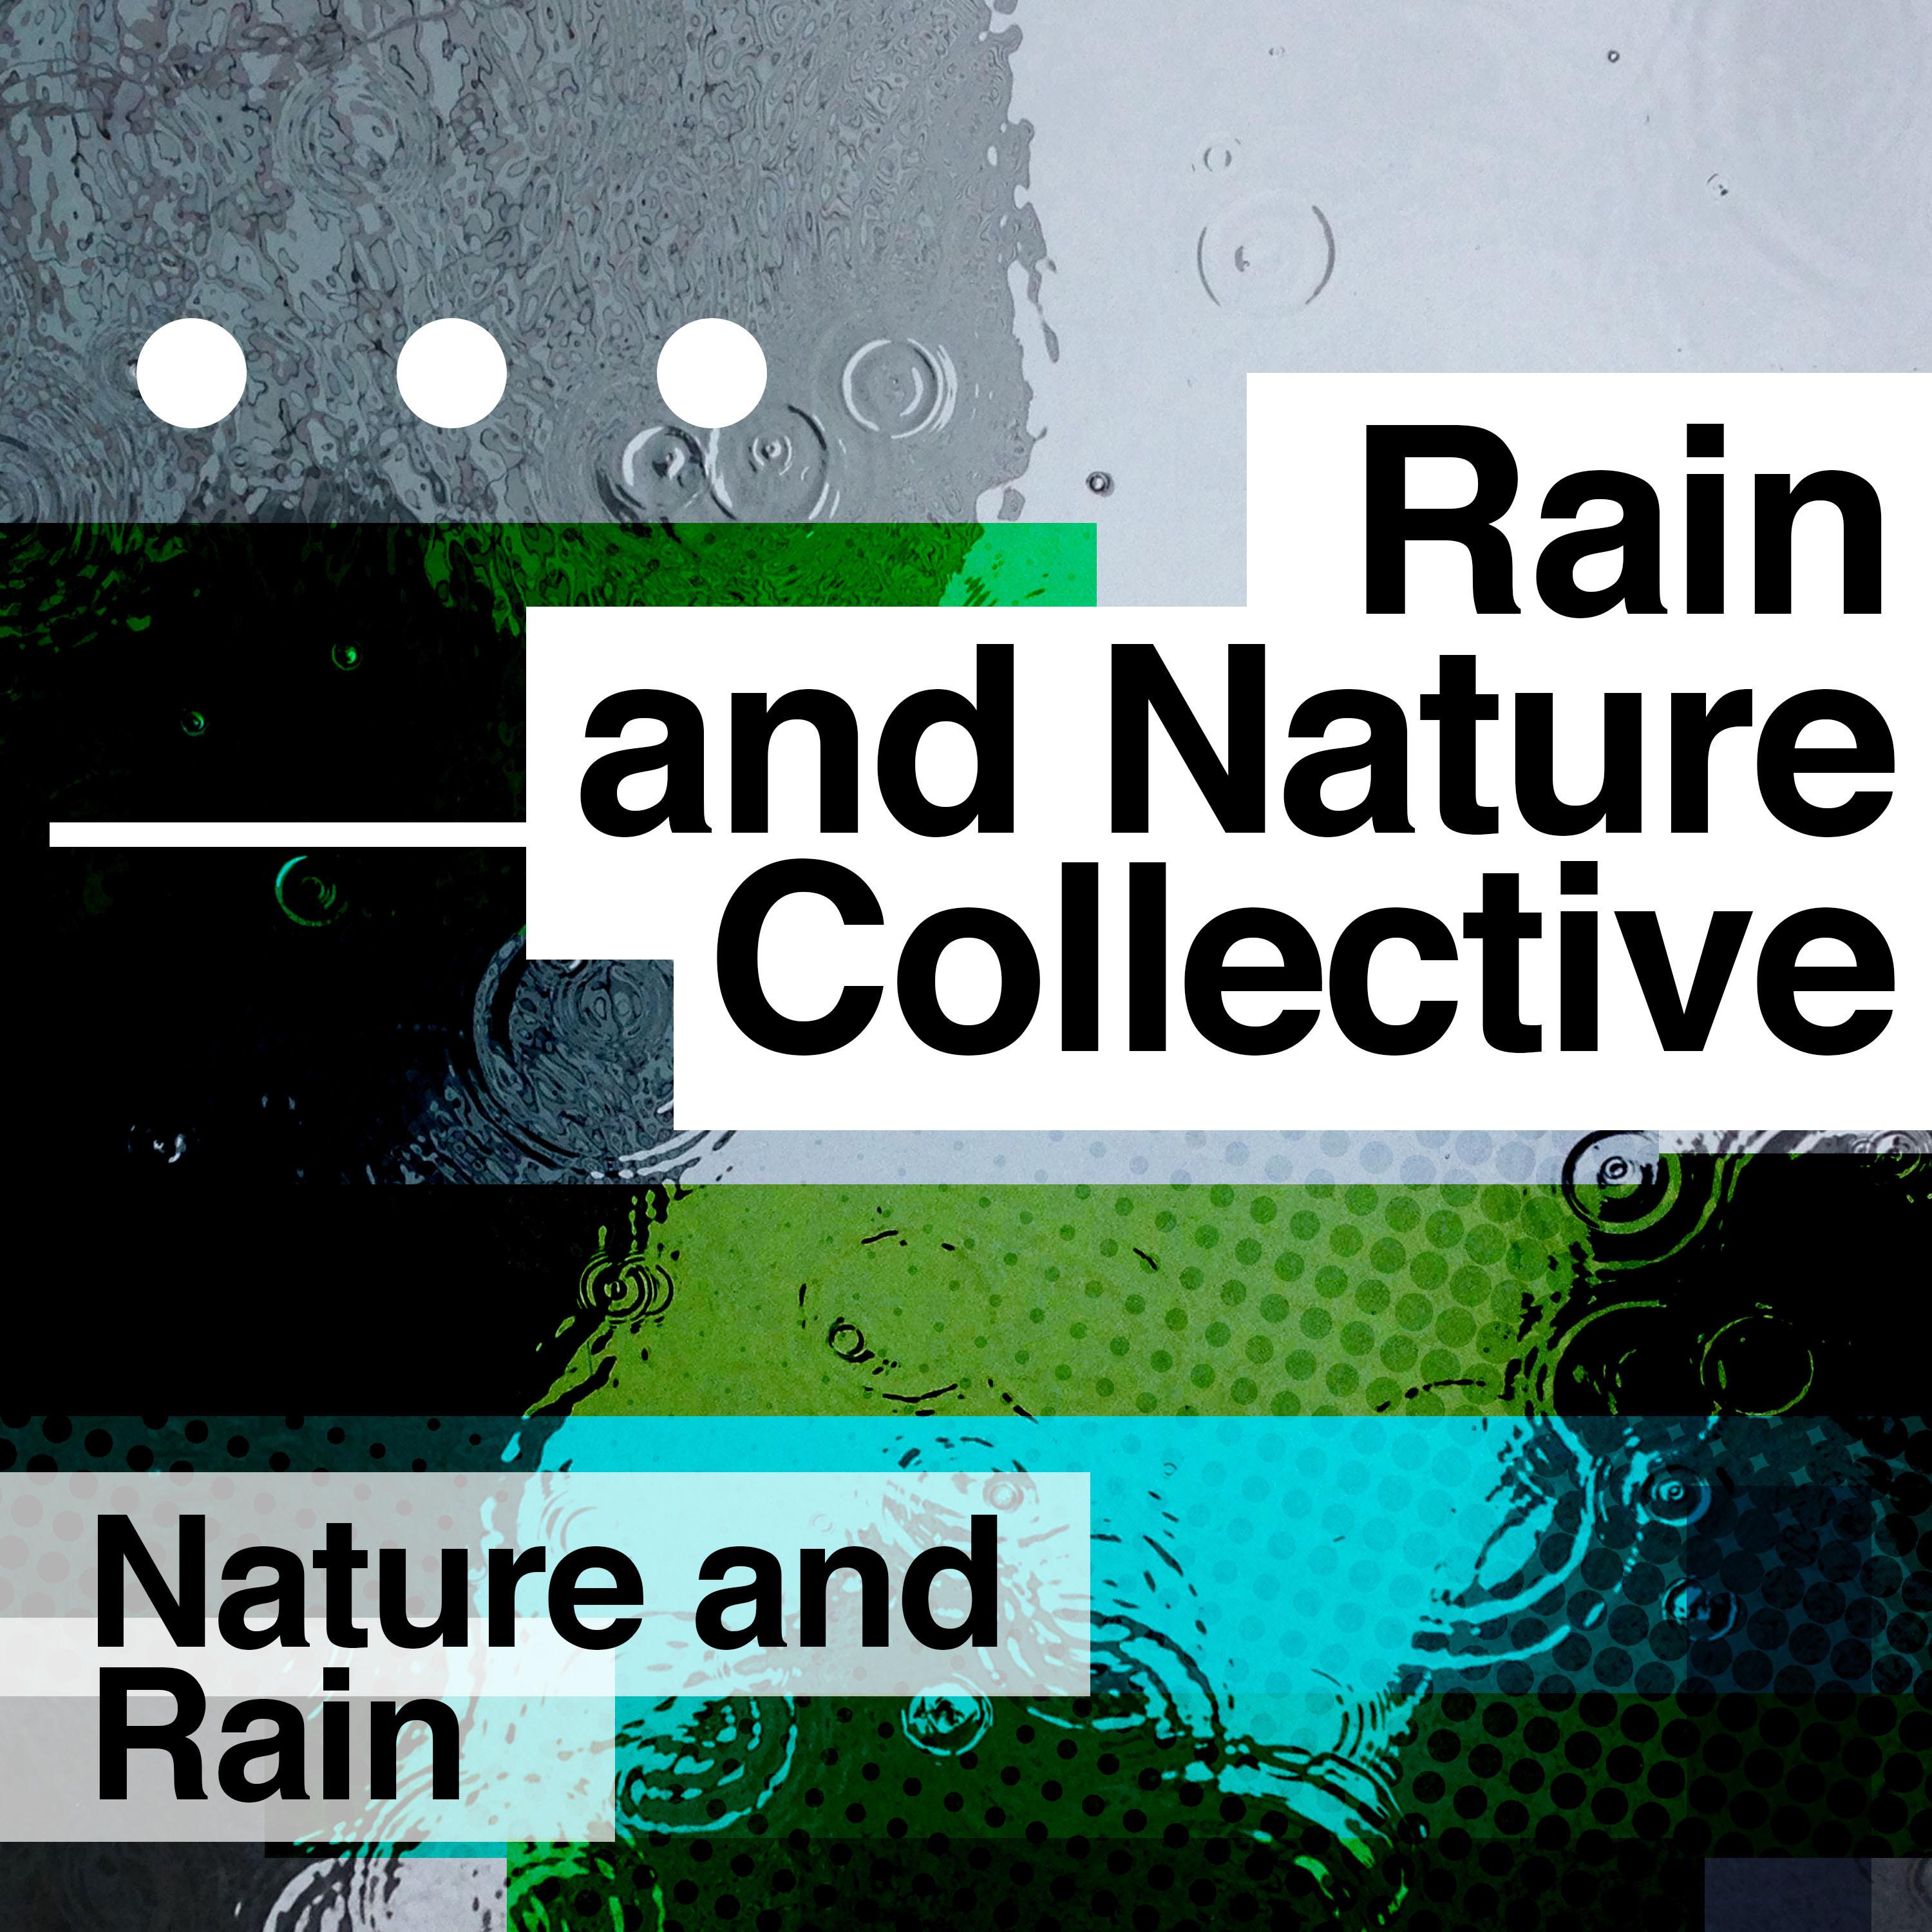 Rain and Nature Collective